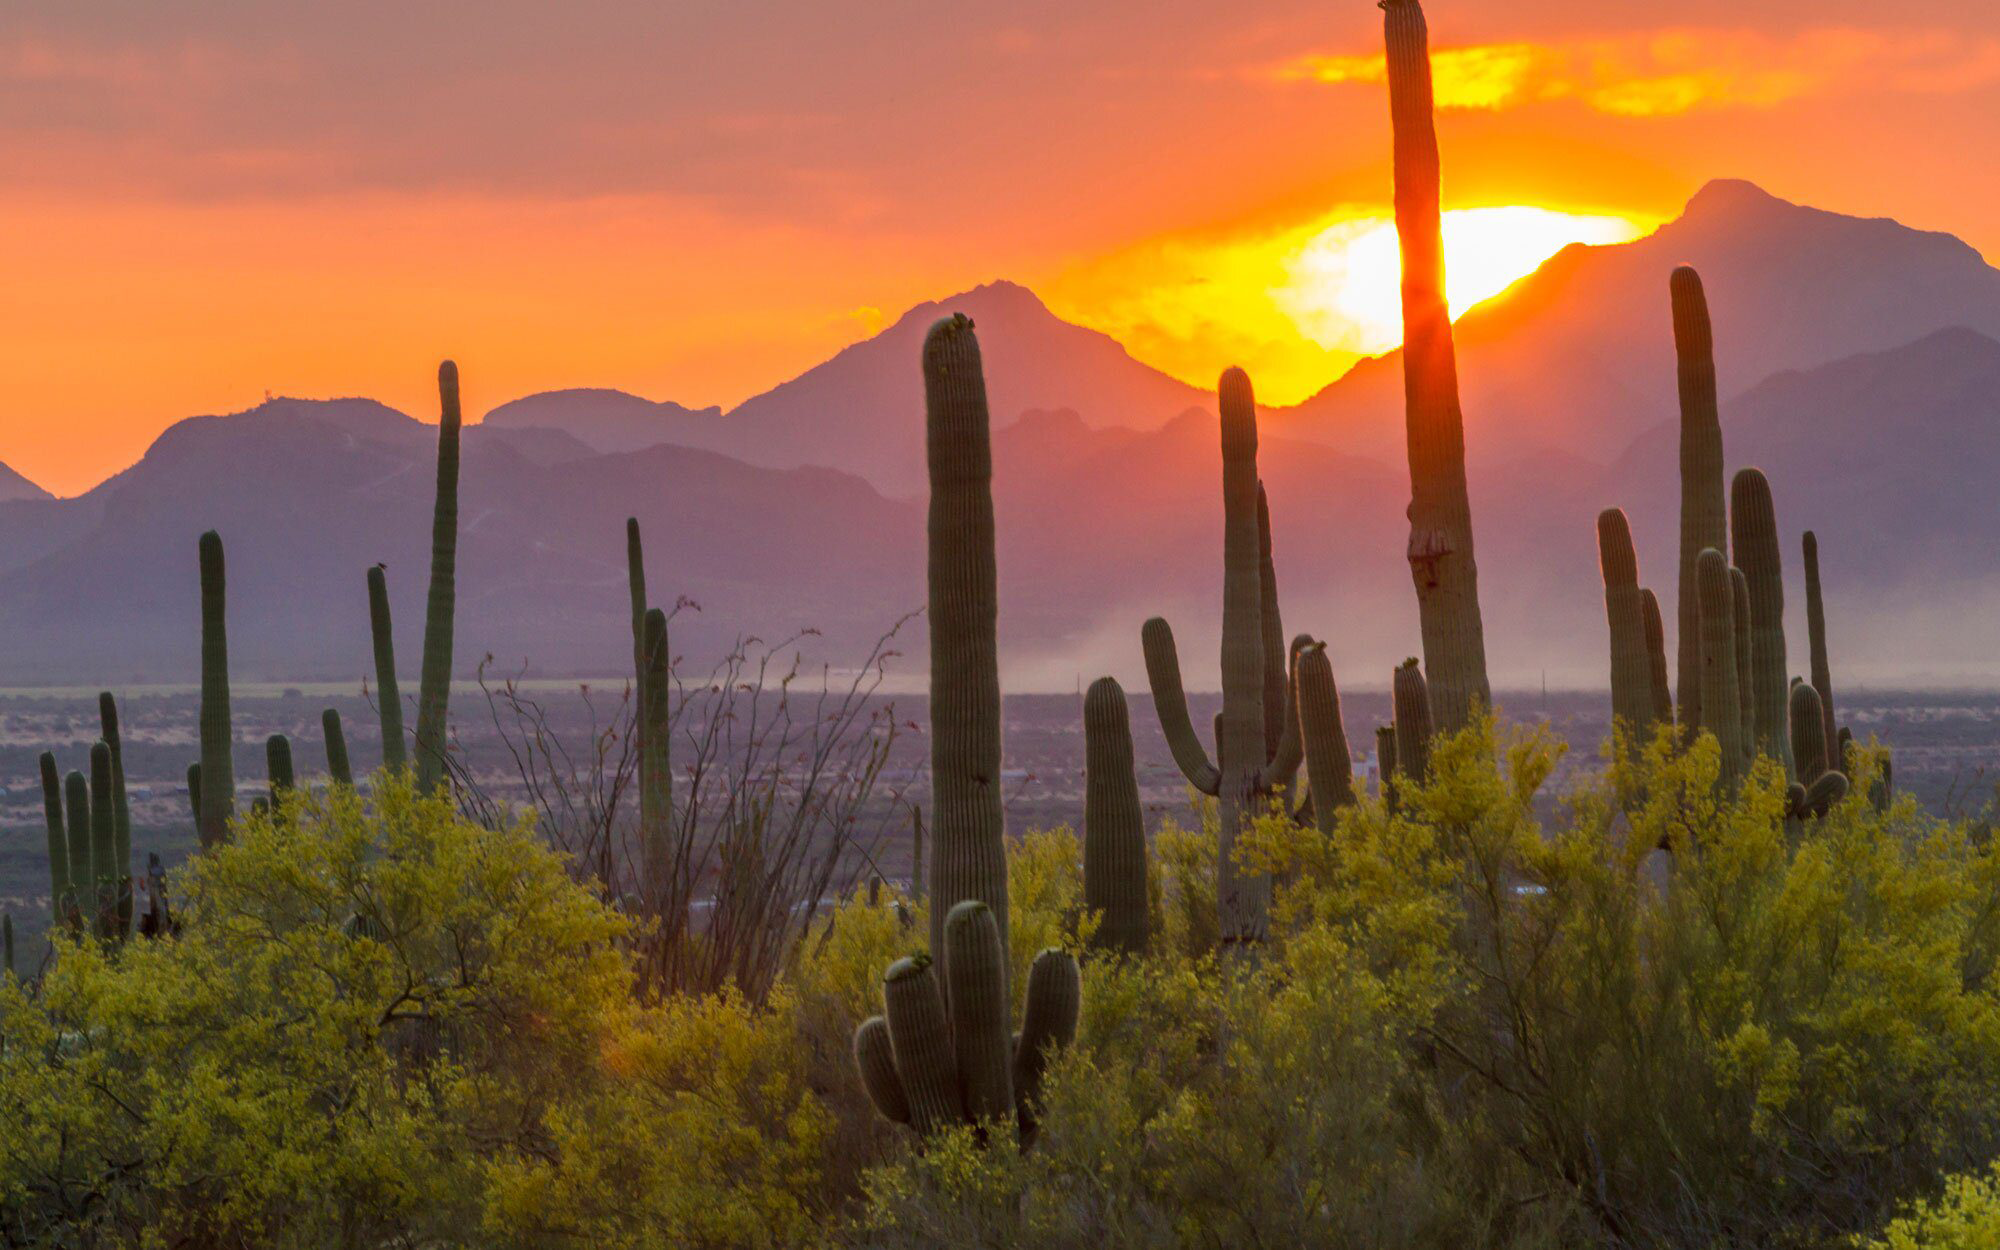 The New York Times Mentions Saguaro National Park